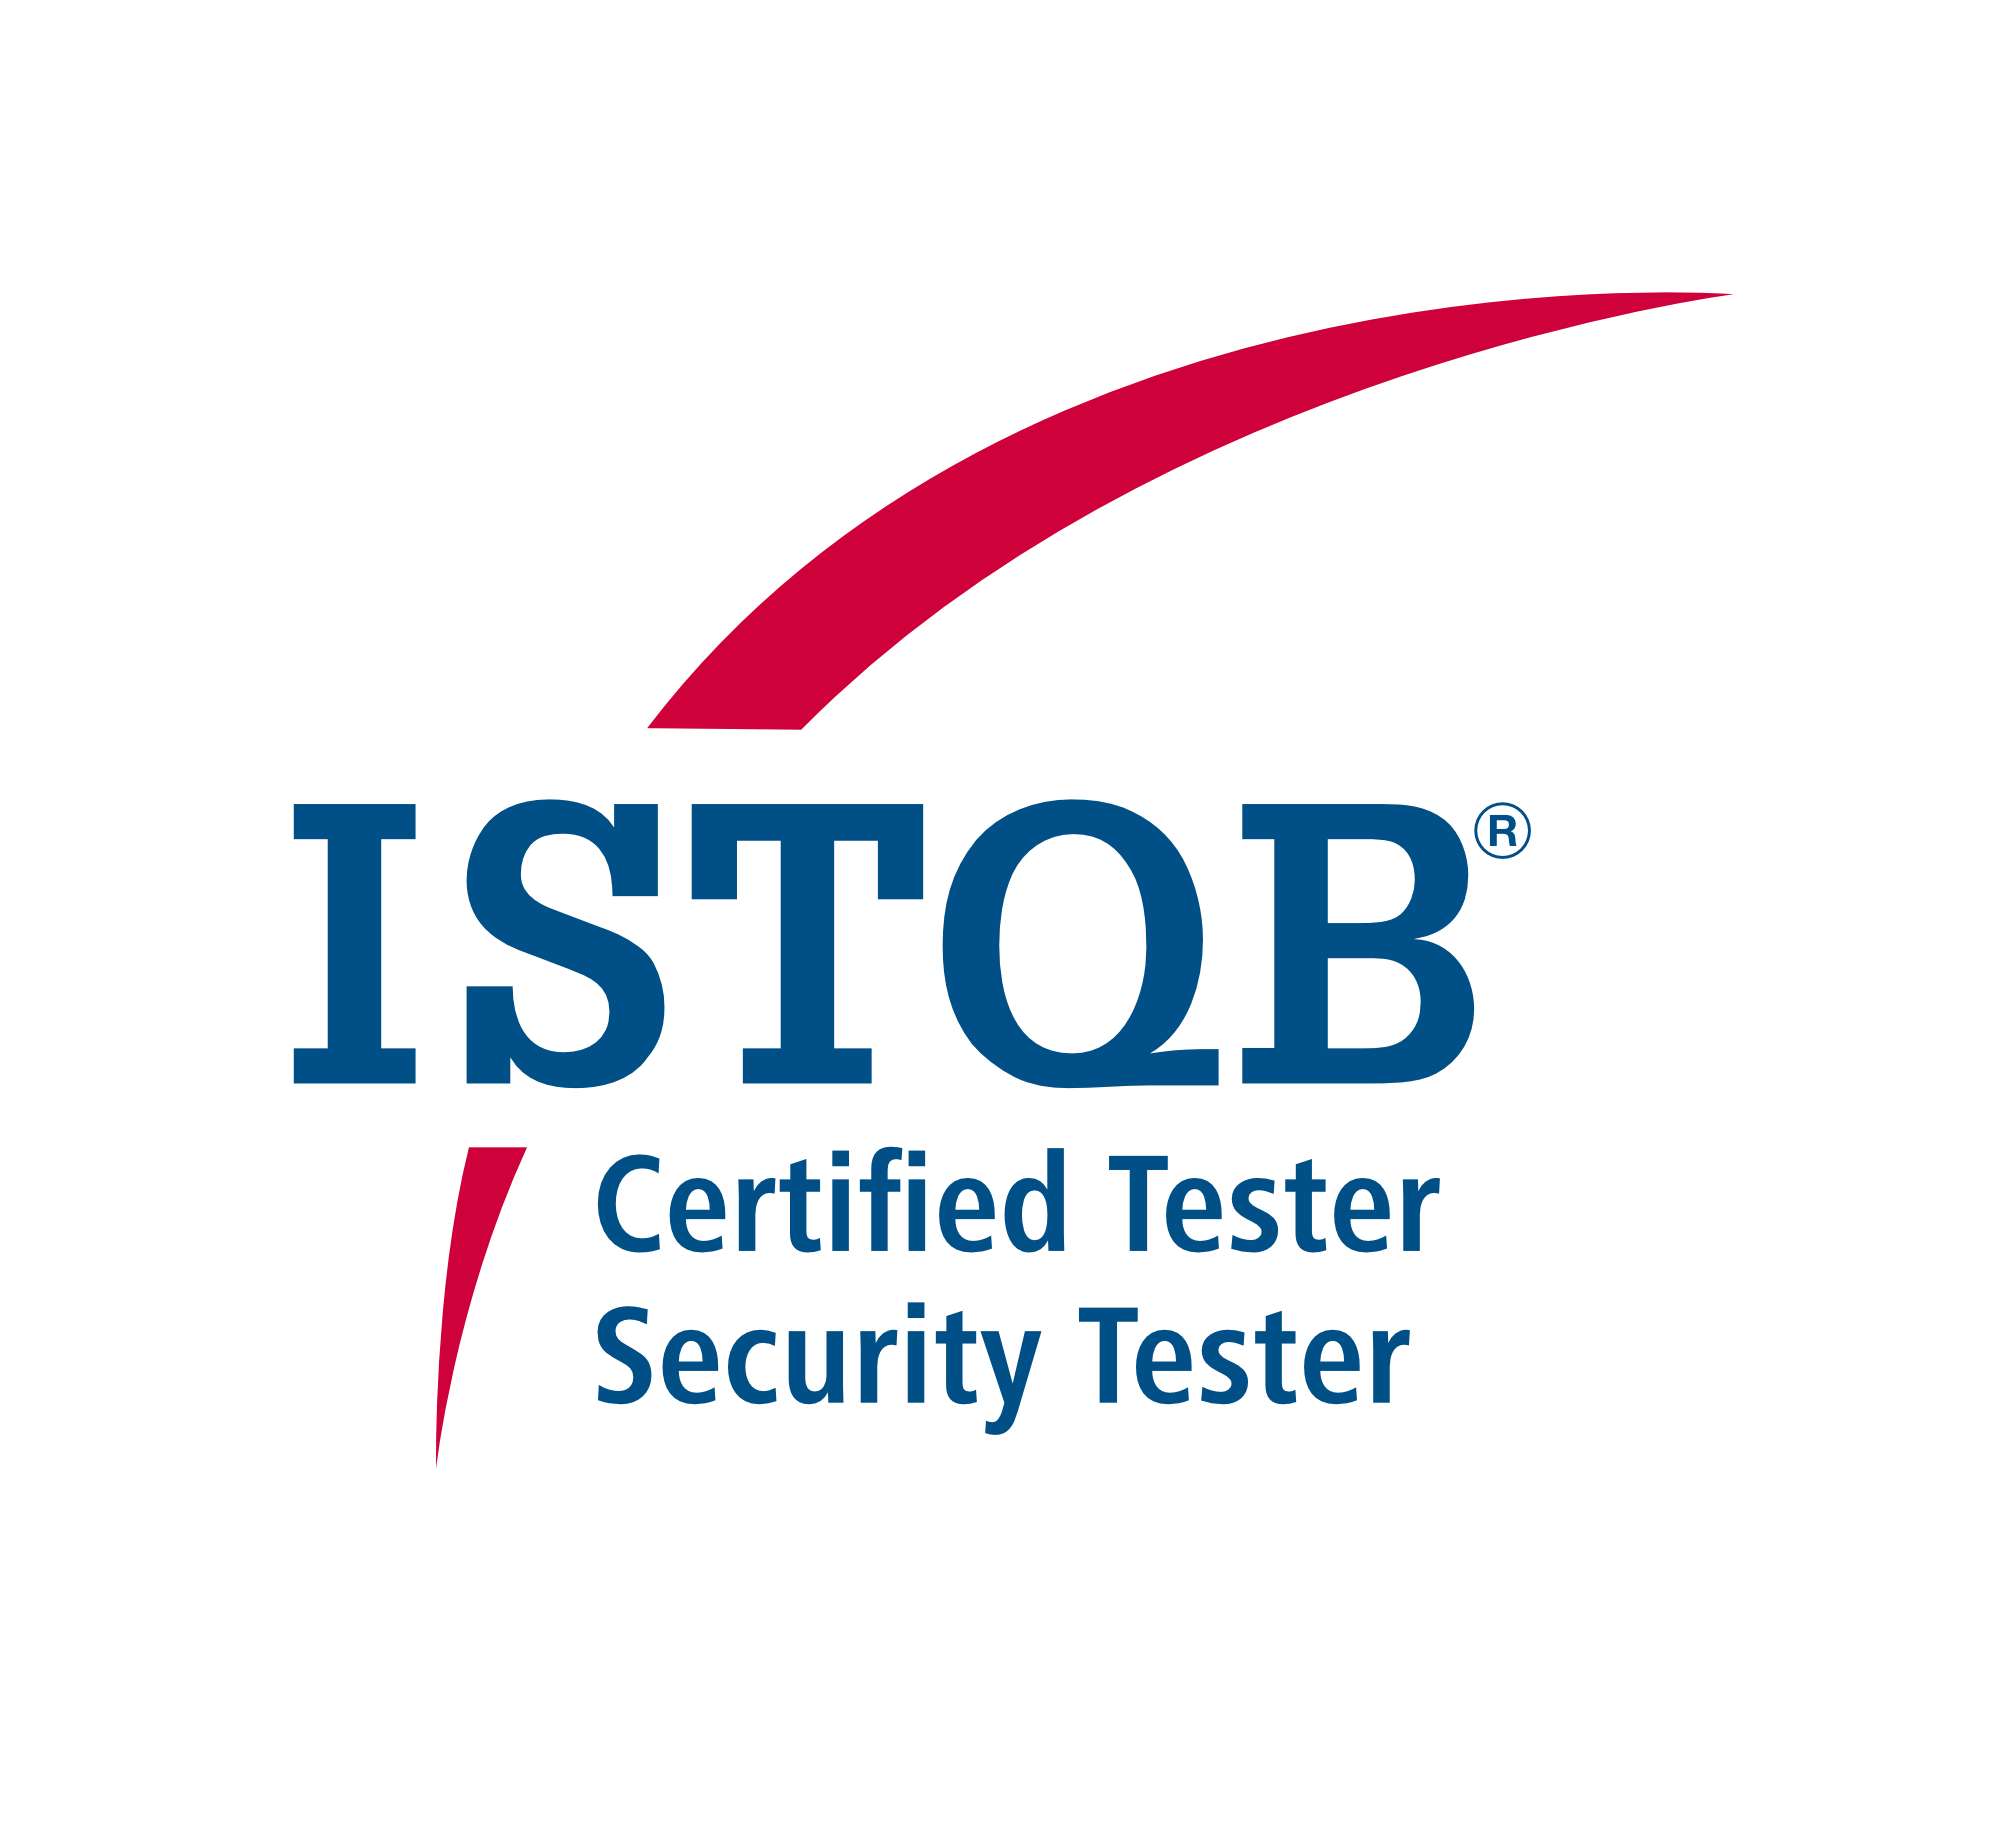 
			ISTQB Certified Tester- Security Tester
		